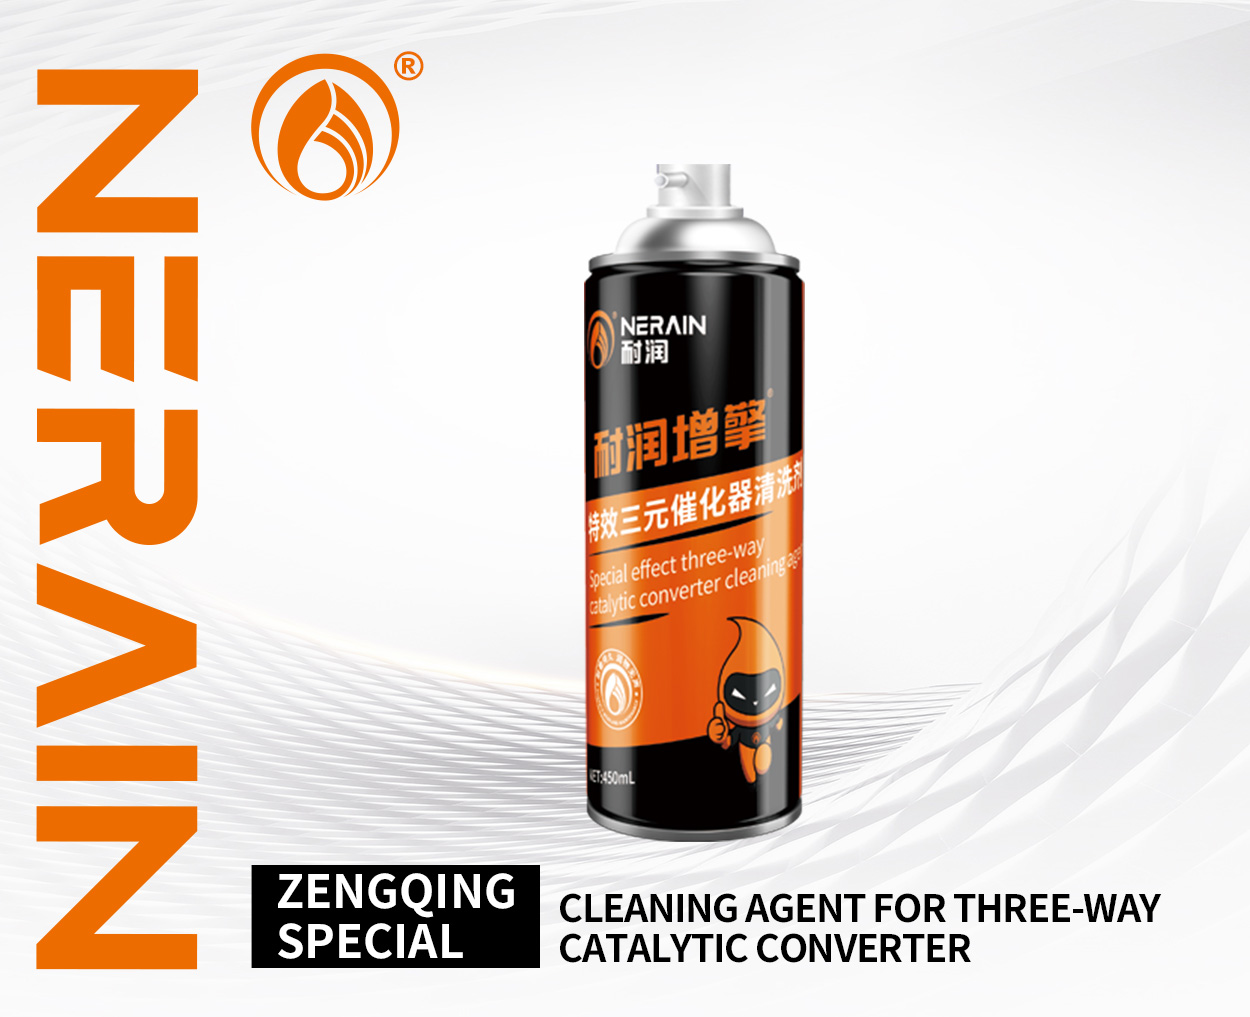 Cleaning Agent for Three-way Catalytic Converter